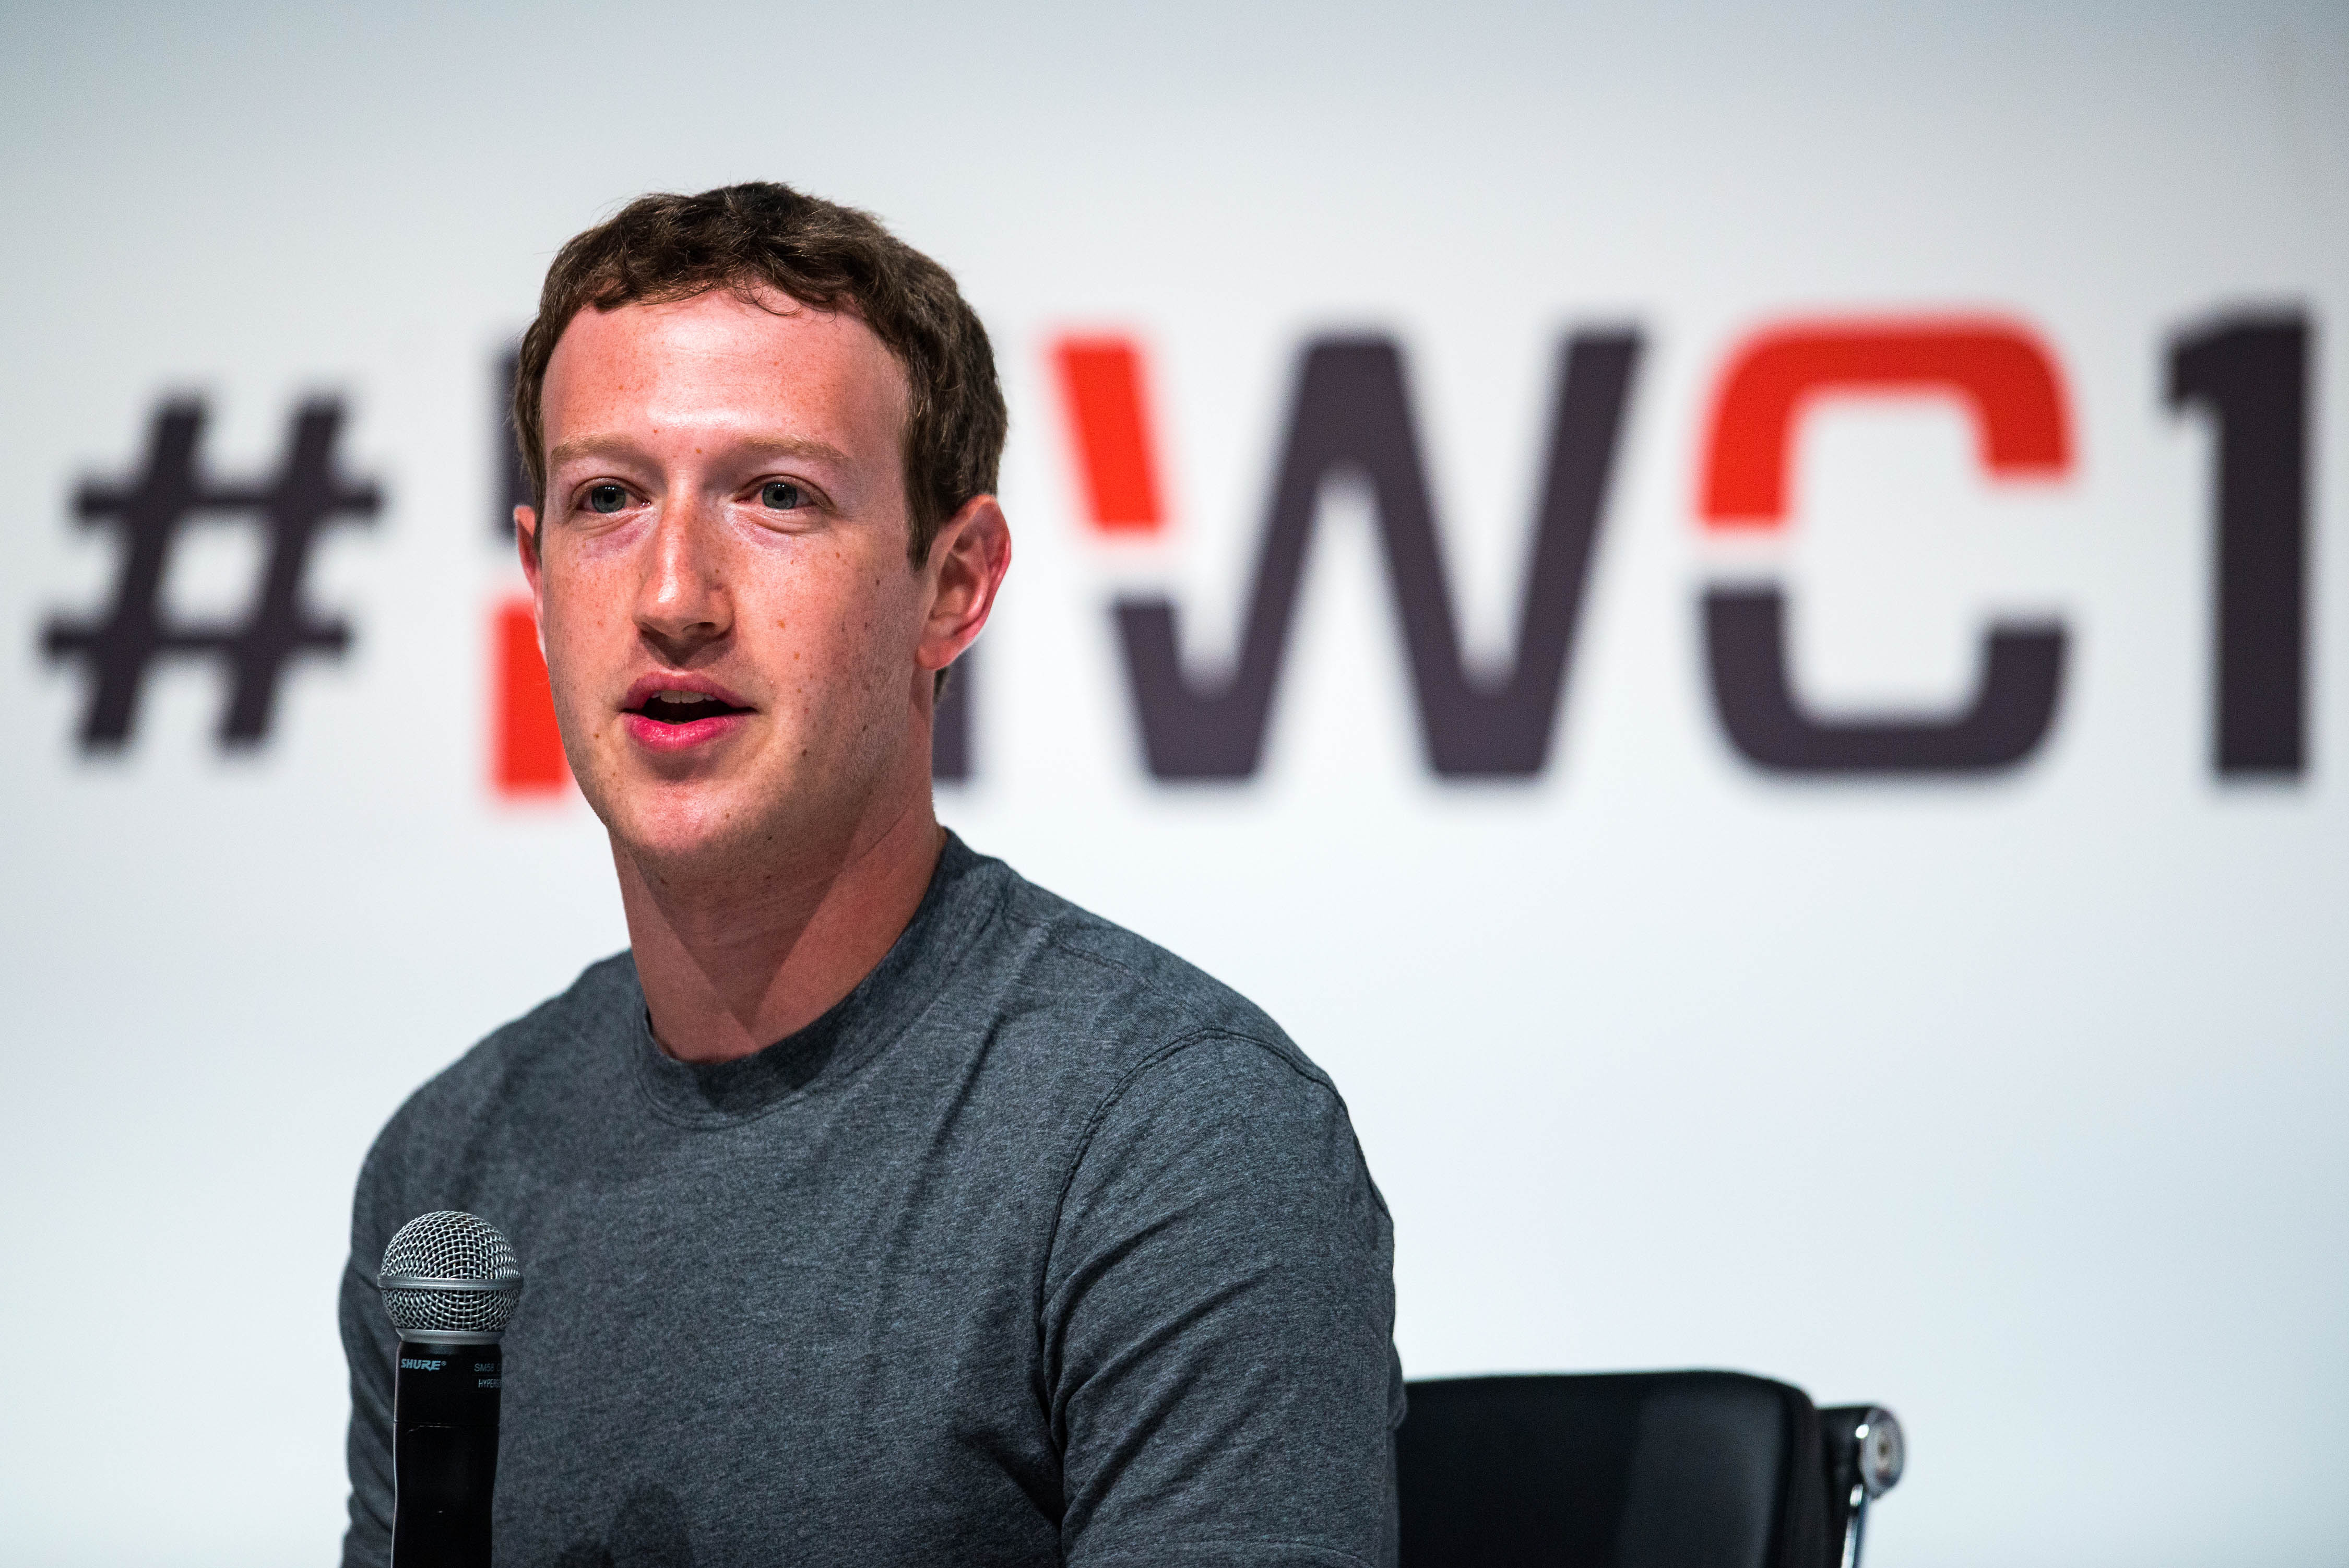 Mark Zuckerberg speaks during his keynote conference during the first day of the Mobile World Congress 2015 in Barcelona, Spain on March 2, 2015. (David Ramos—Getty Images)